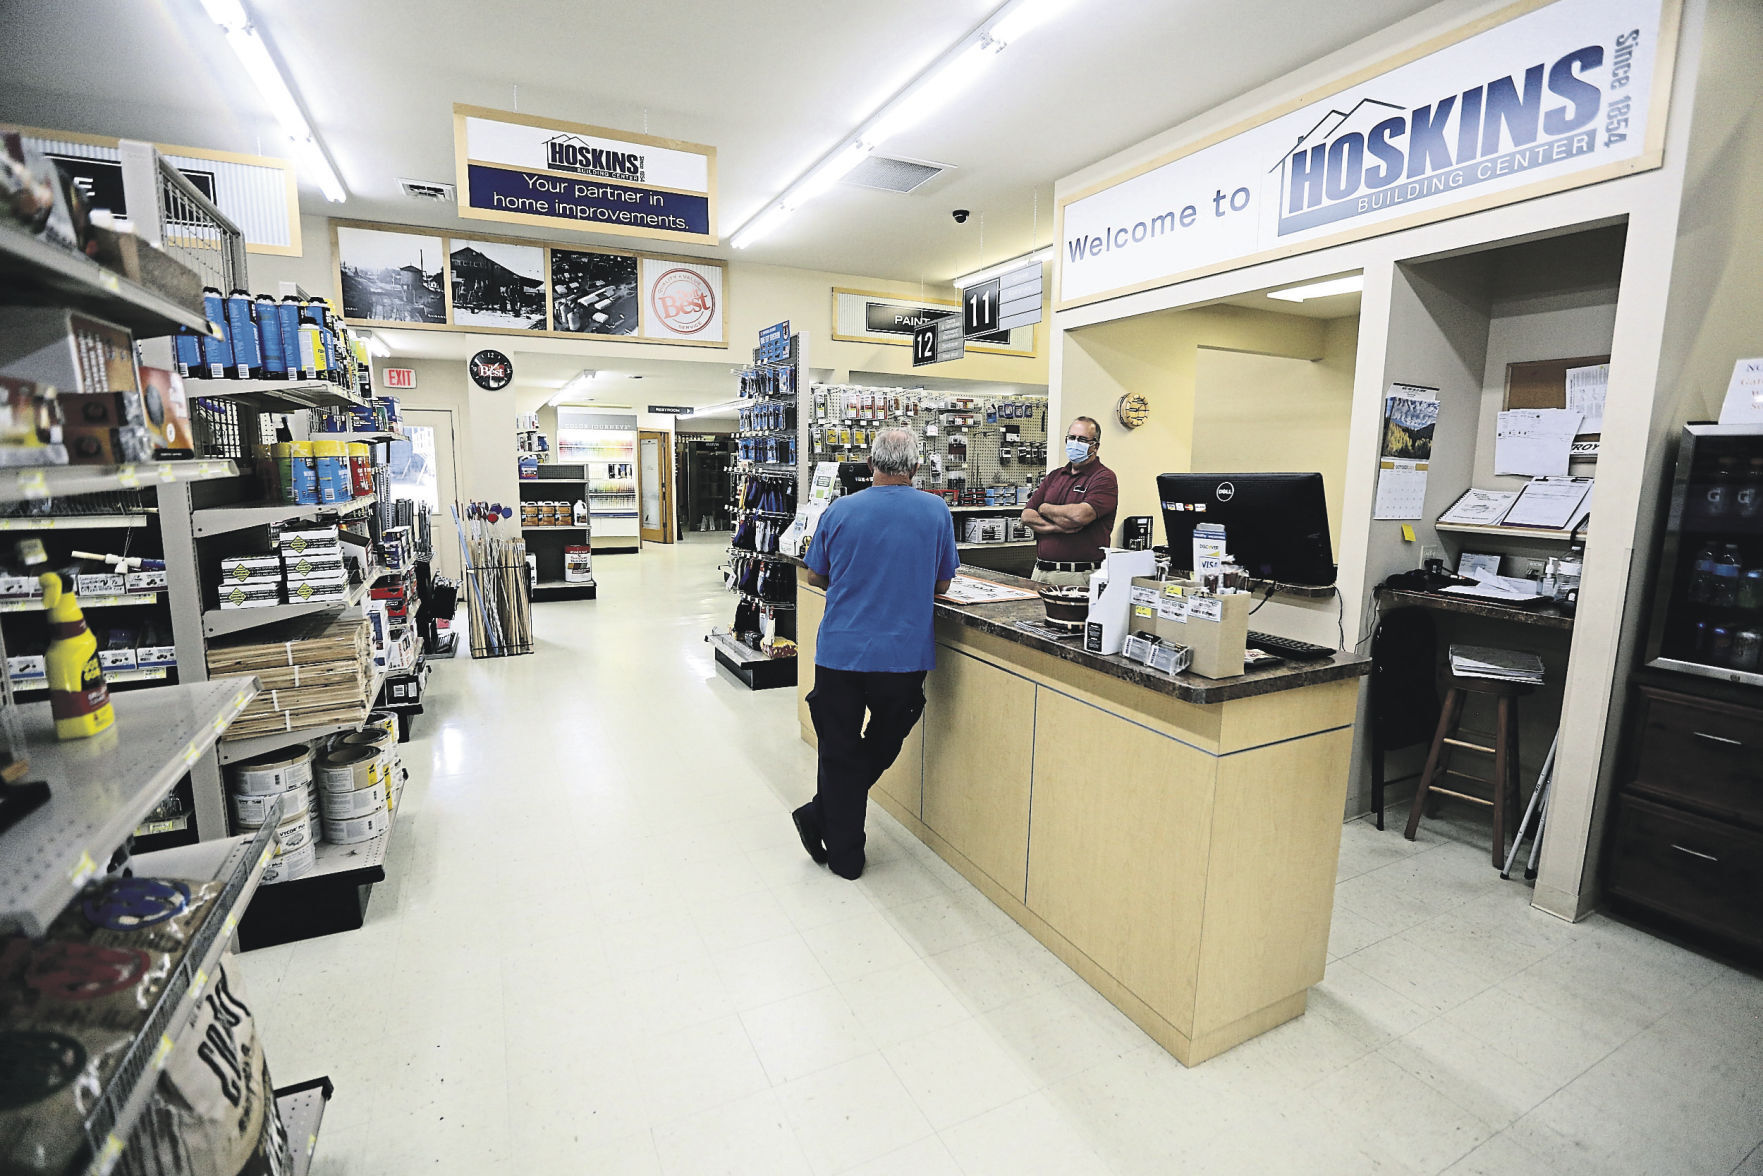 Salesman with Hoskins Building Center, Pete Korth (right) chats with a customer in the hardware store located in Elizabeth, Ill.    PHOTO CREDIT: Dave Kettering